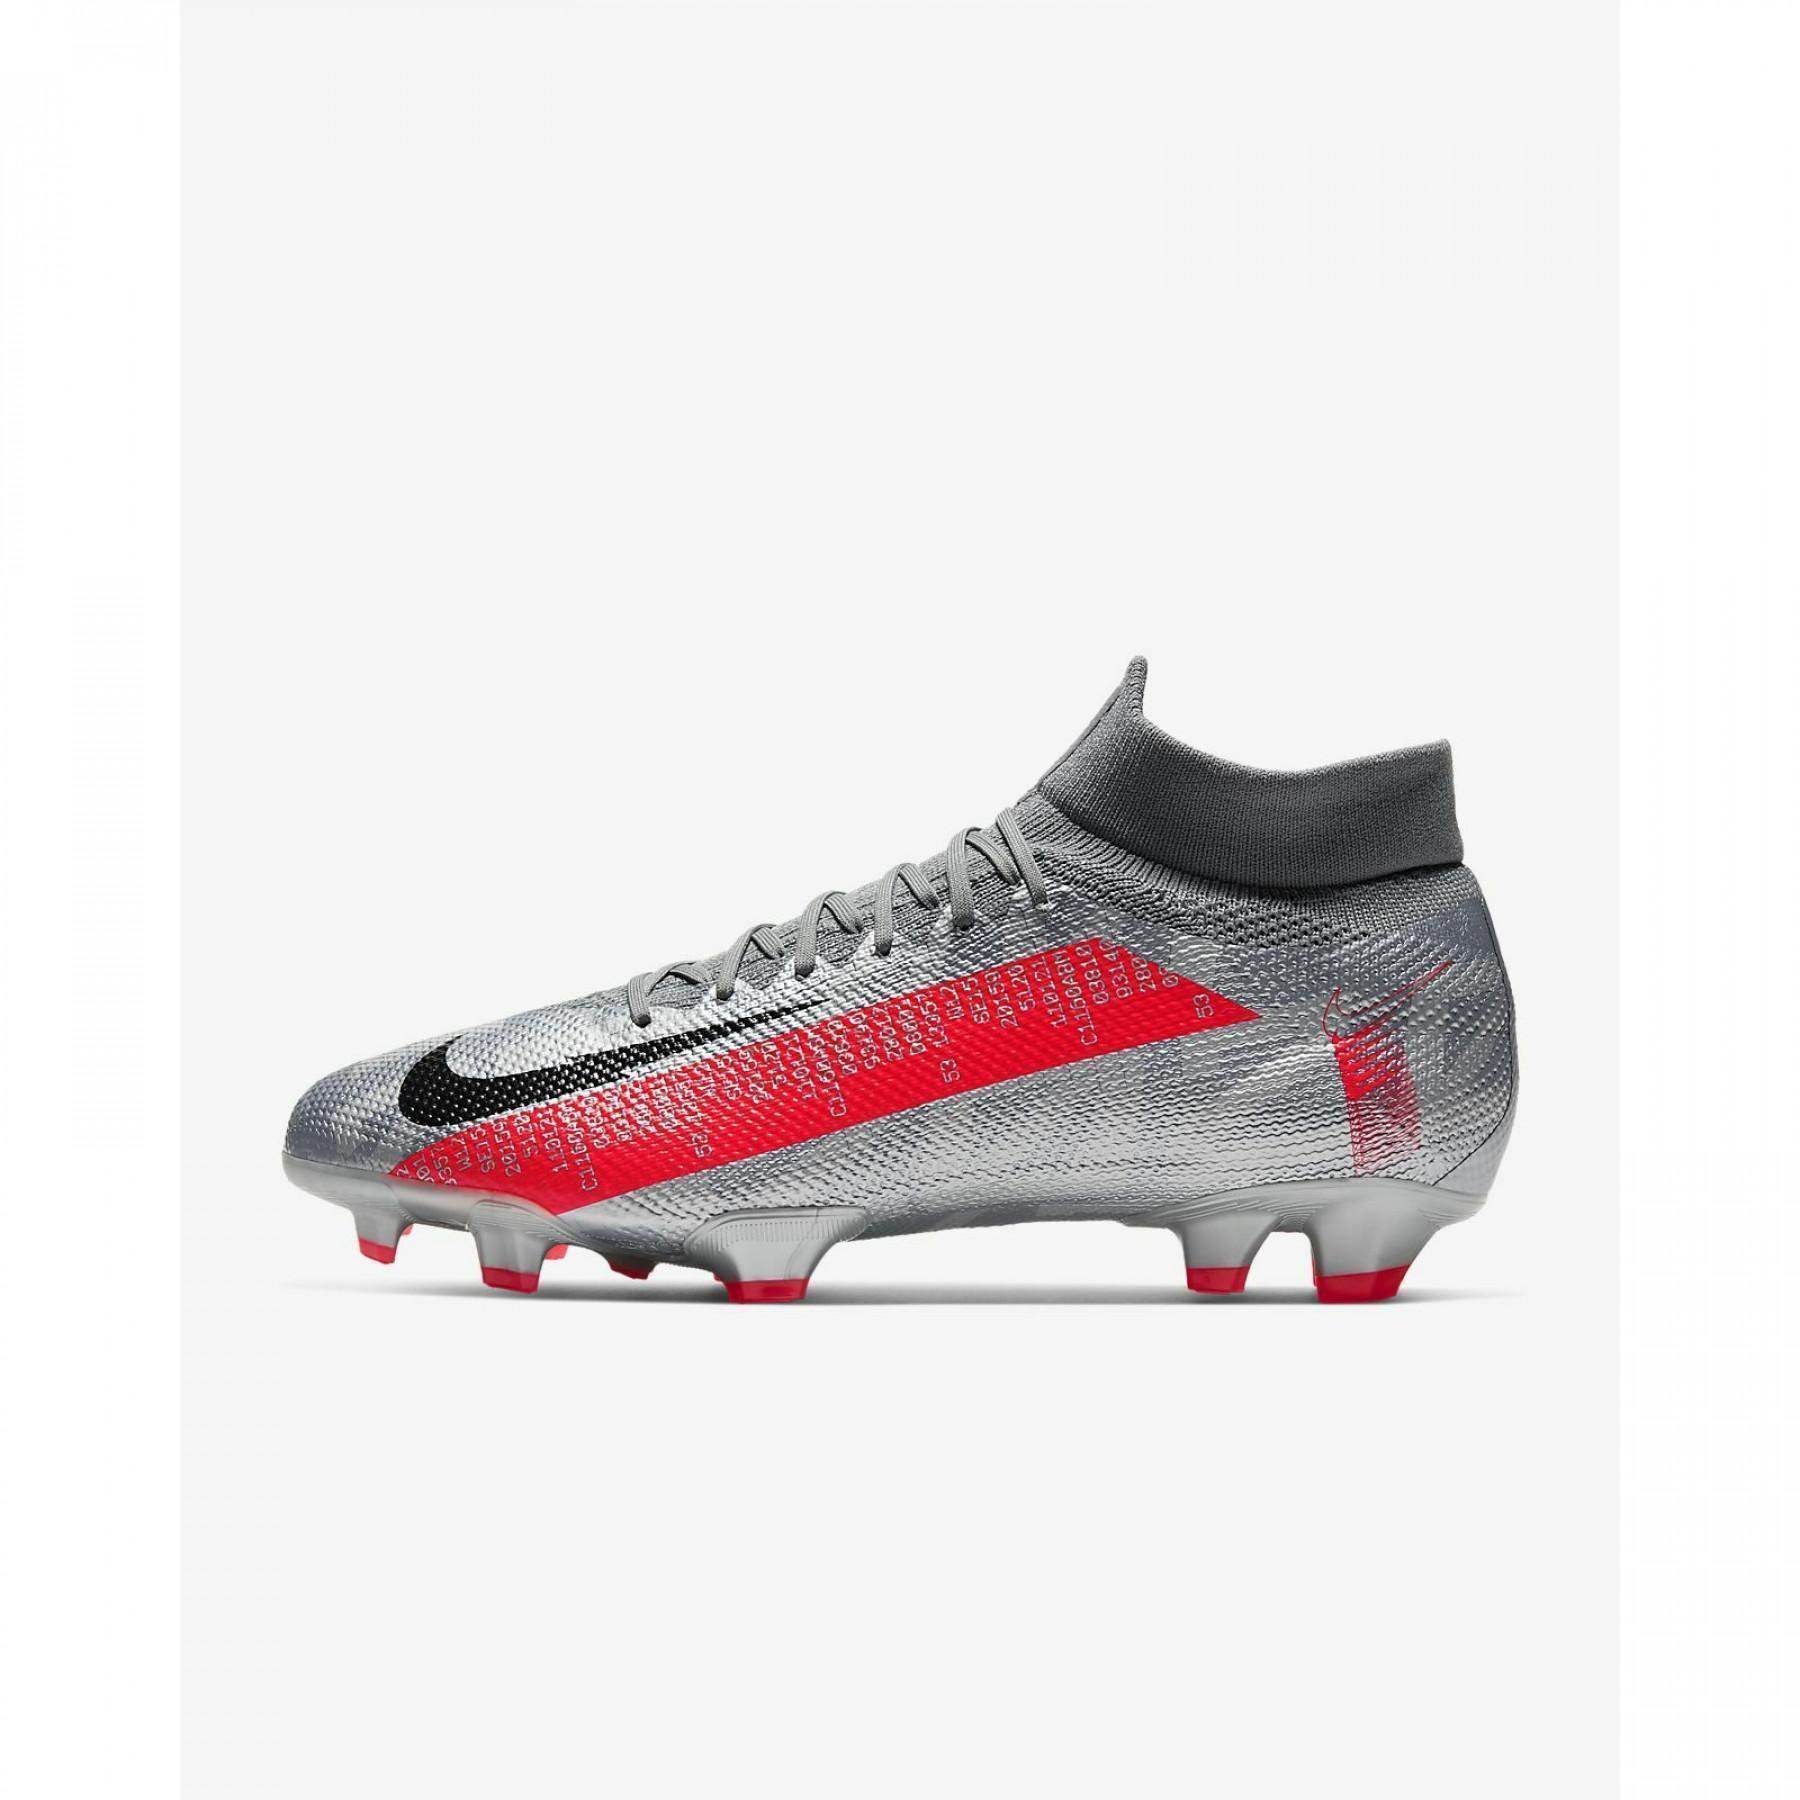 Caius chemicals Martyr Shoes Nike Mercurial Superfly 7 Pro FG